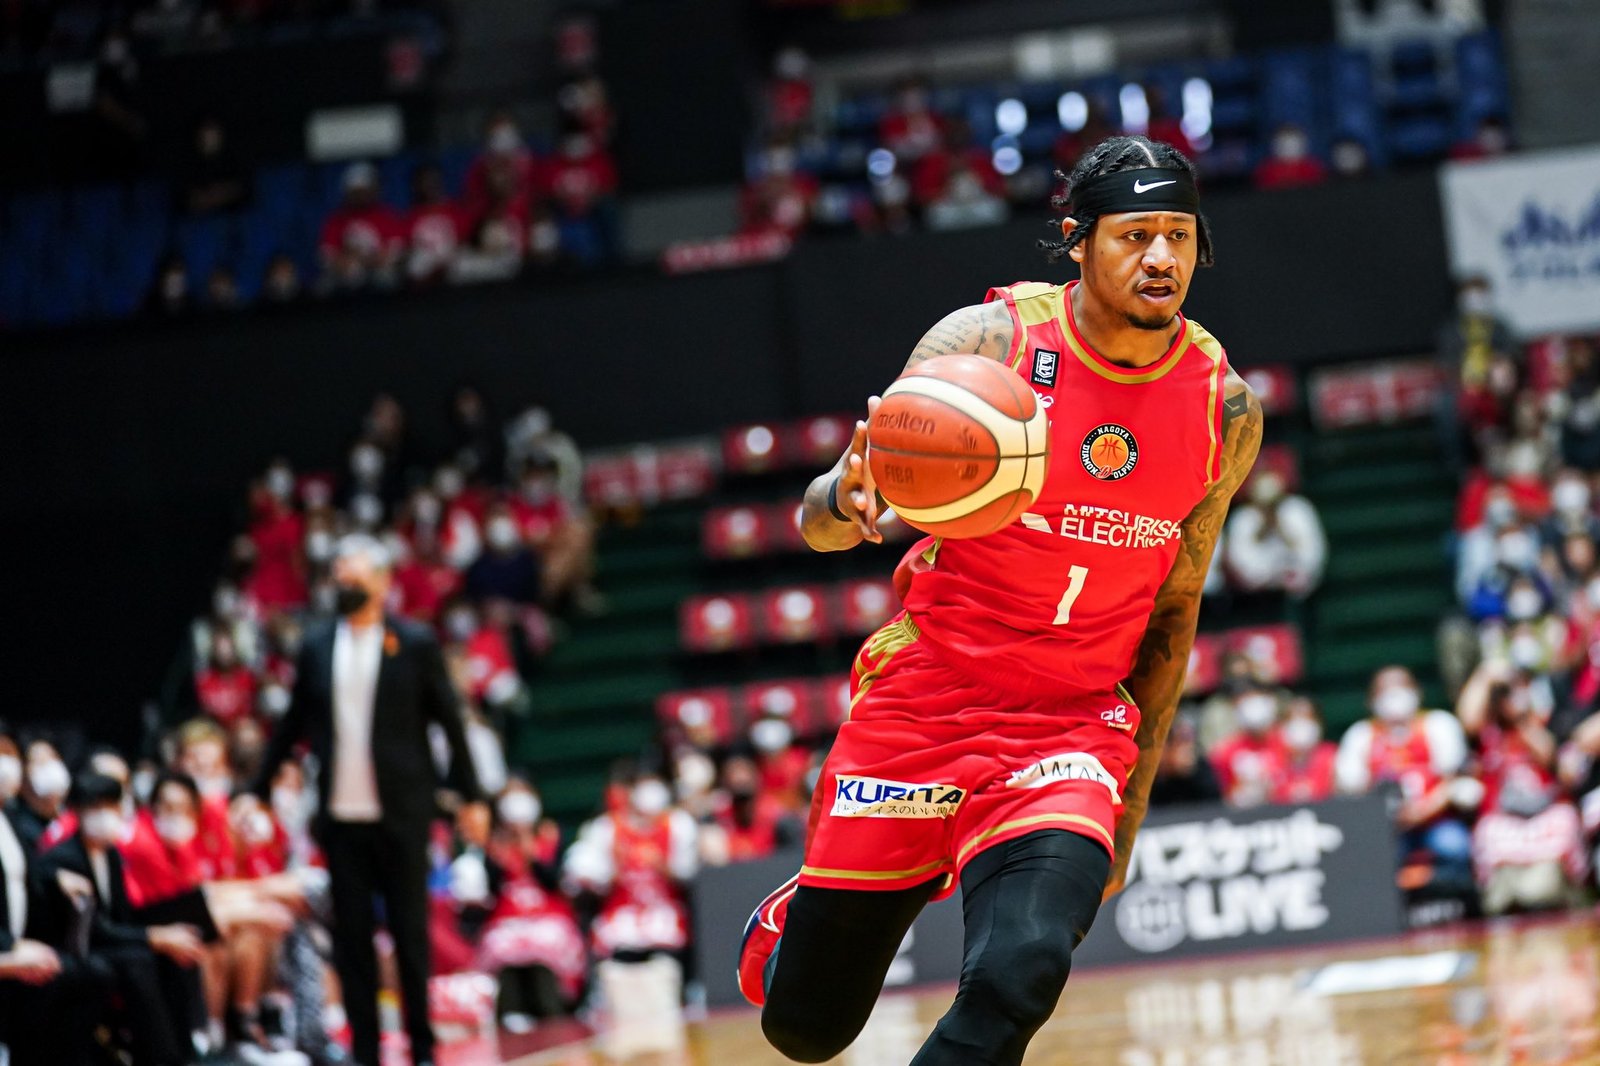 Ray Parks, Nagoya negotiate contract extension